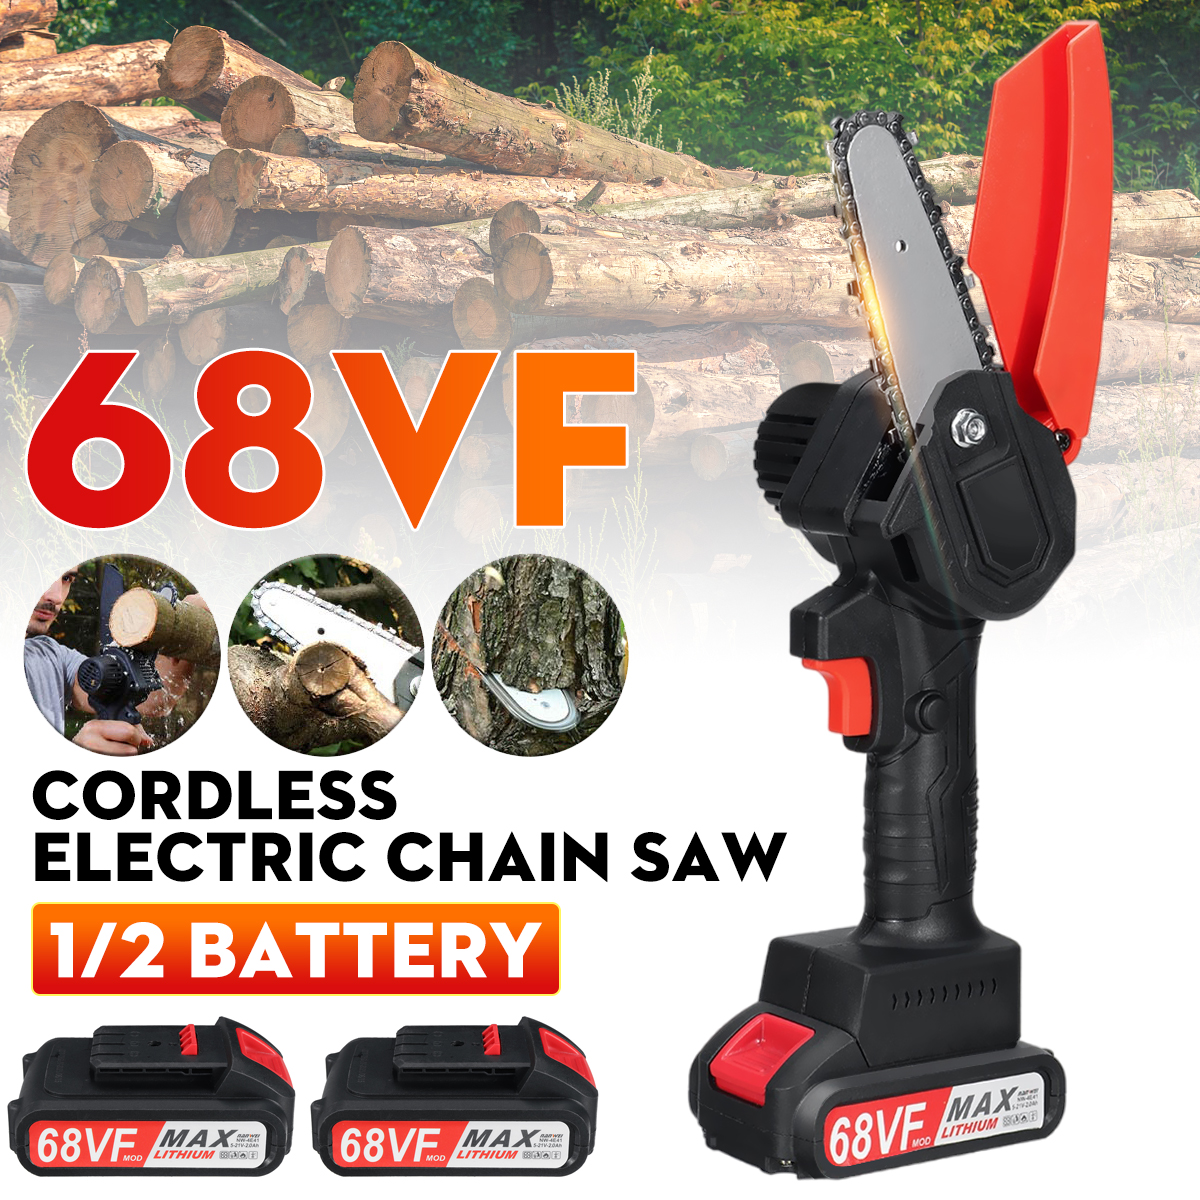 4-Inch-Mini-Cordless-Electric-Chain-Saw-One-Hand-Saw-Woodworking-Wood-Cutter-W-12-Battery-1879172-2